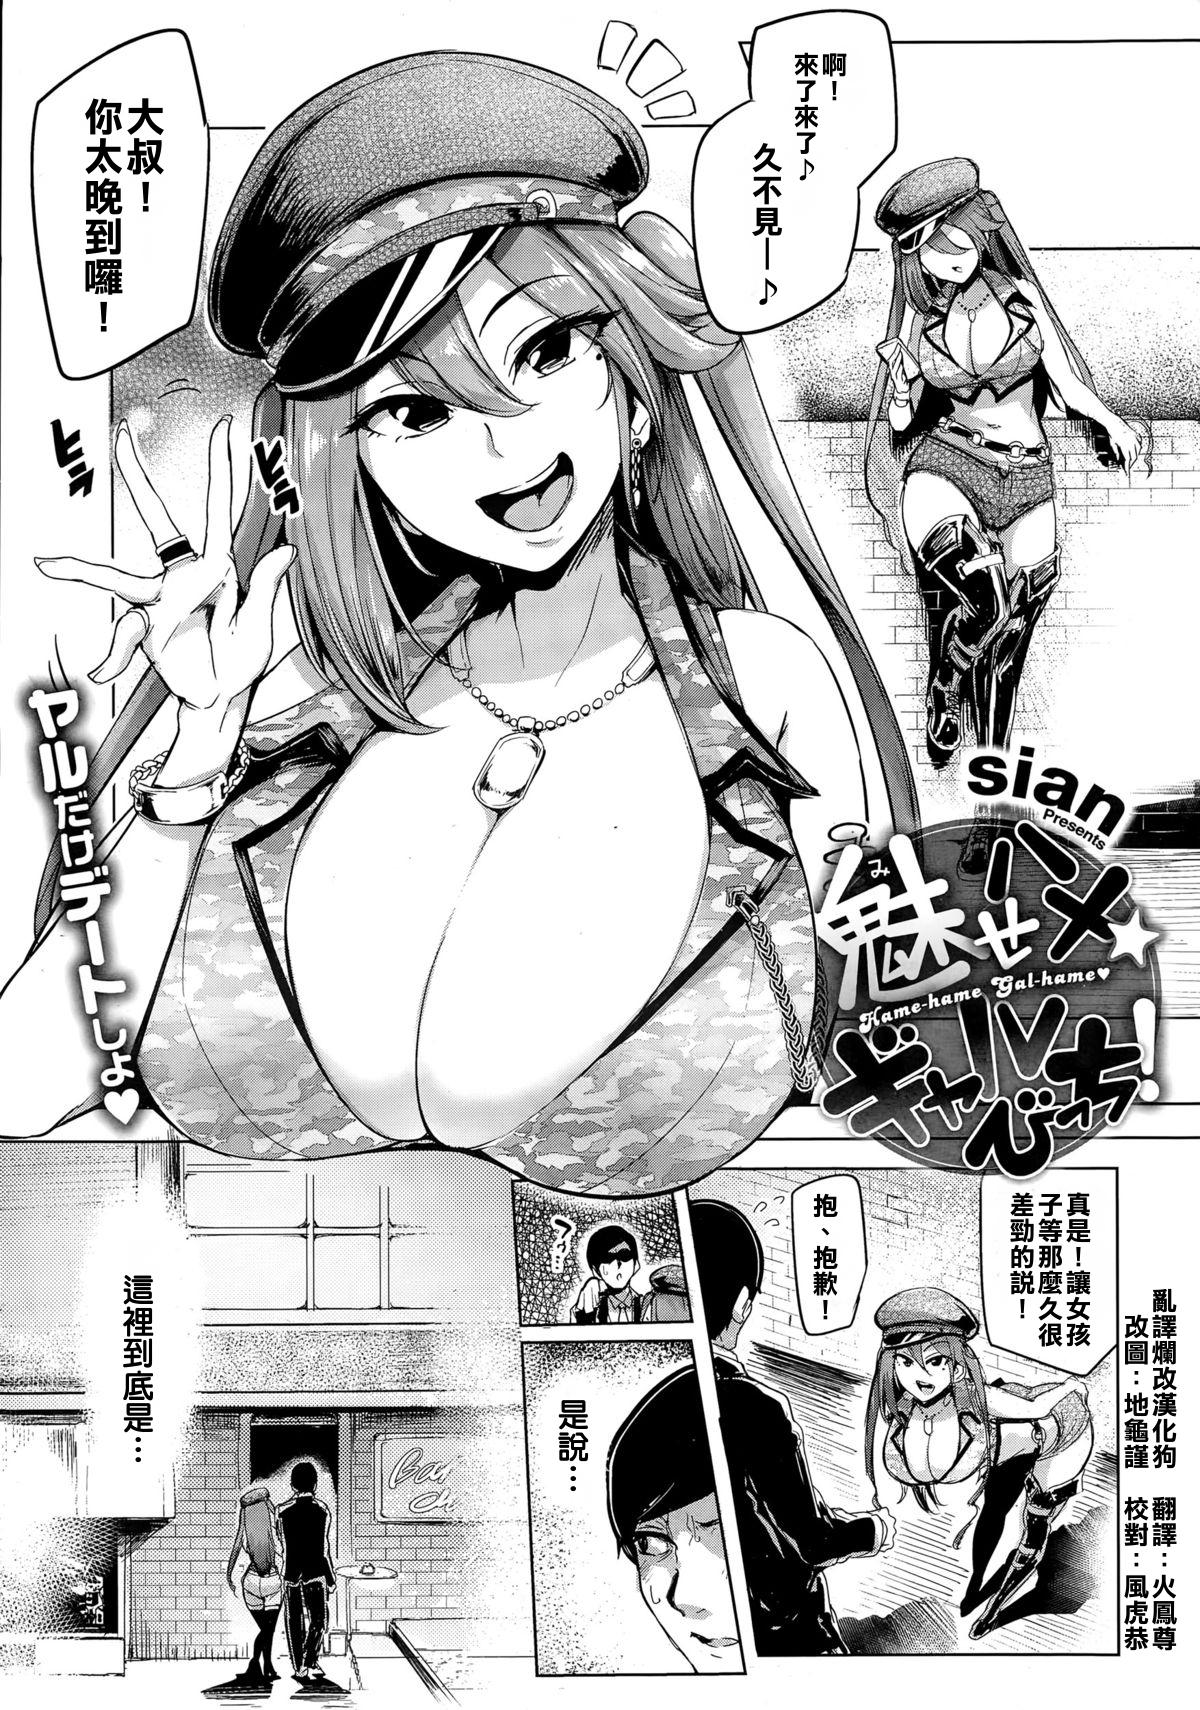 Assfingering Soku Hame Gal Bitch ! ＋ Mise Hame Gal Bitch ! | One-Night Stand with a Gyaru Slut! + Fucking a Gyaru Slut! + Gals Bitch After Oshiri Hen | Gyaru Slut! After Butt Edition Rub - Page 5